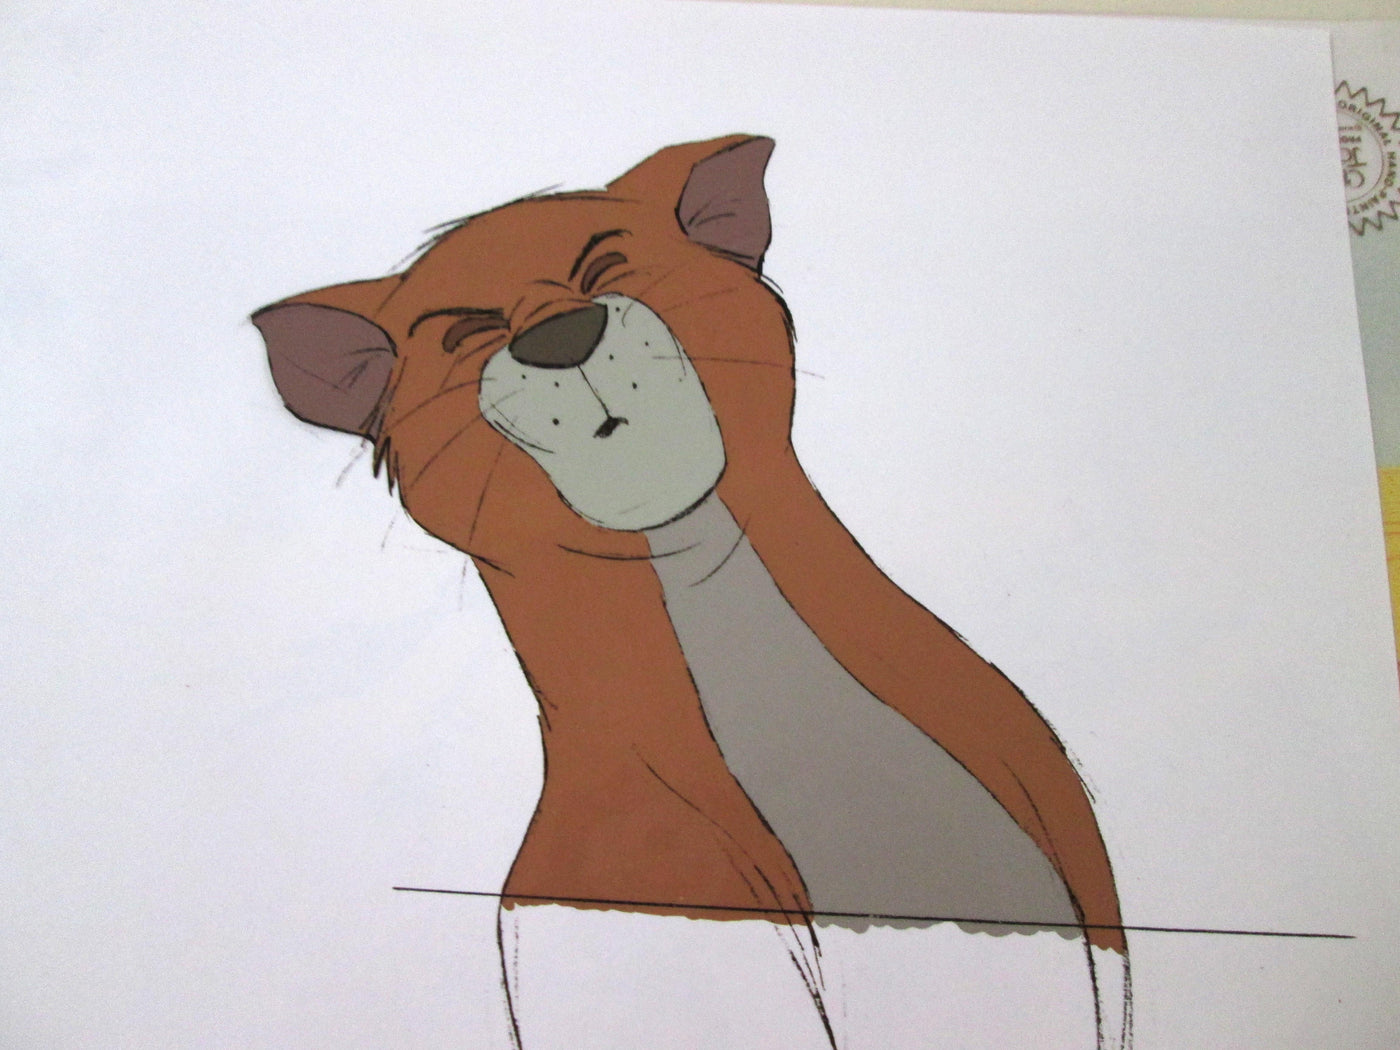 Original Walt Disney Production Cel from The Aristocats featuring Thomas O'Malley